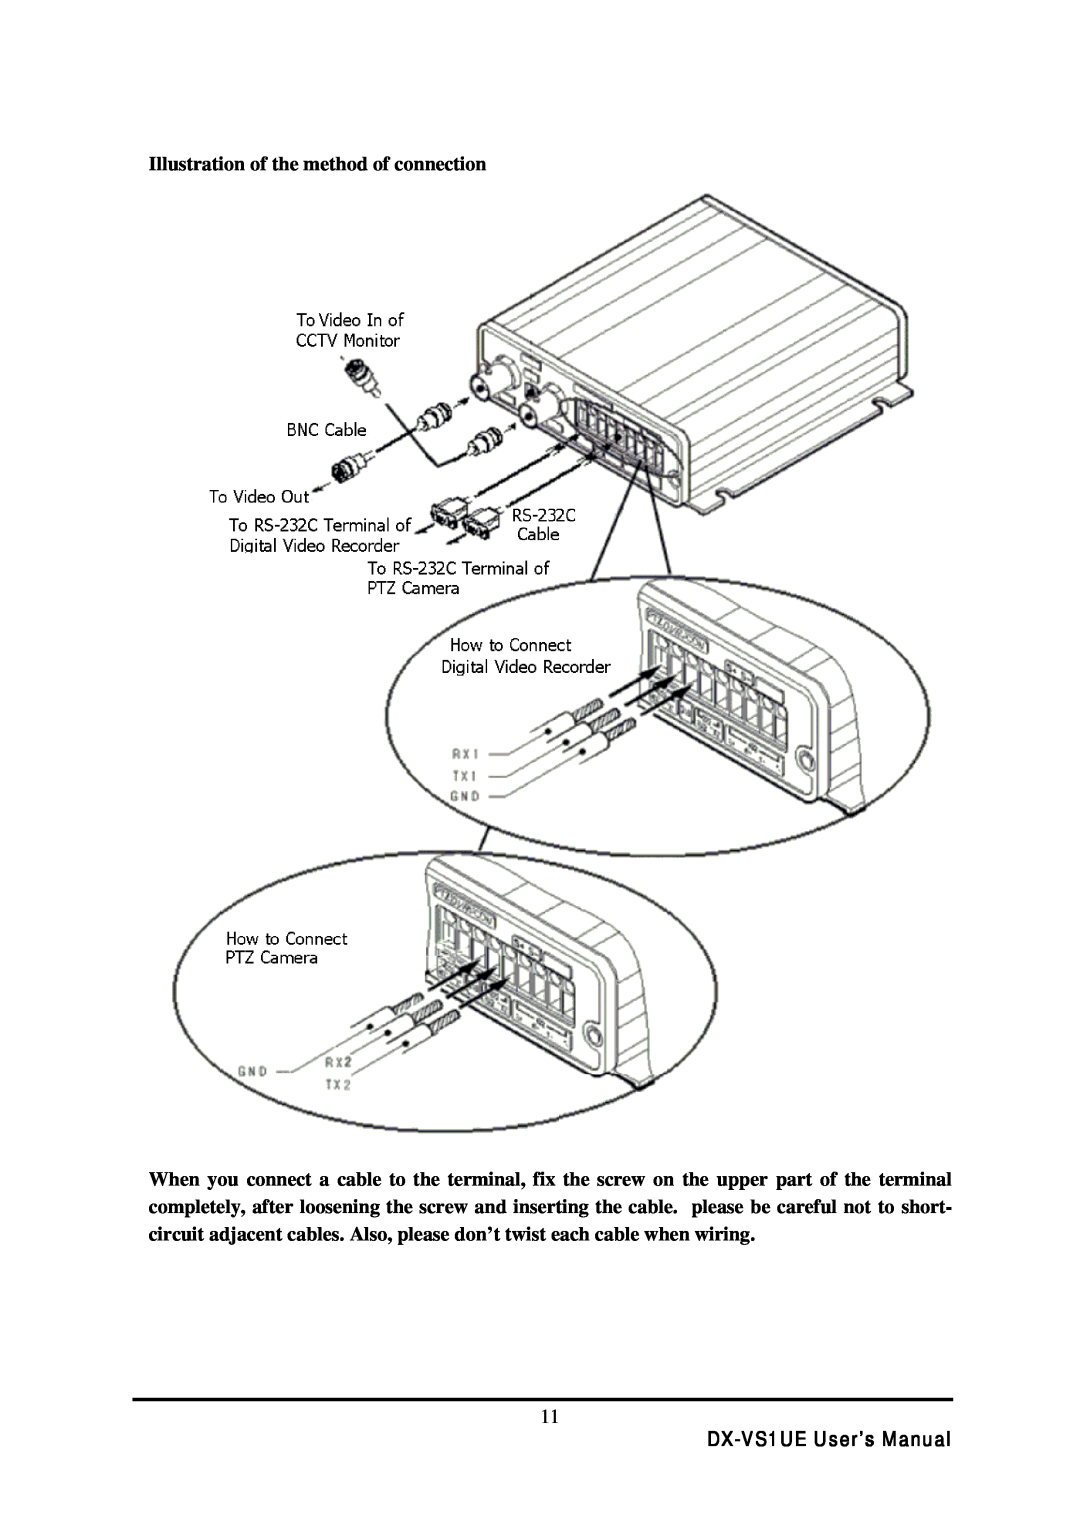 Mitsubishi Electronics user manual Illustration of the method of connection, DX-VS1UE User’s Manual 